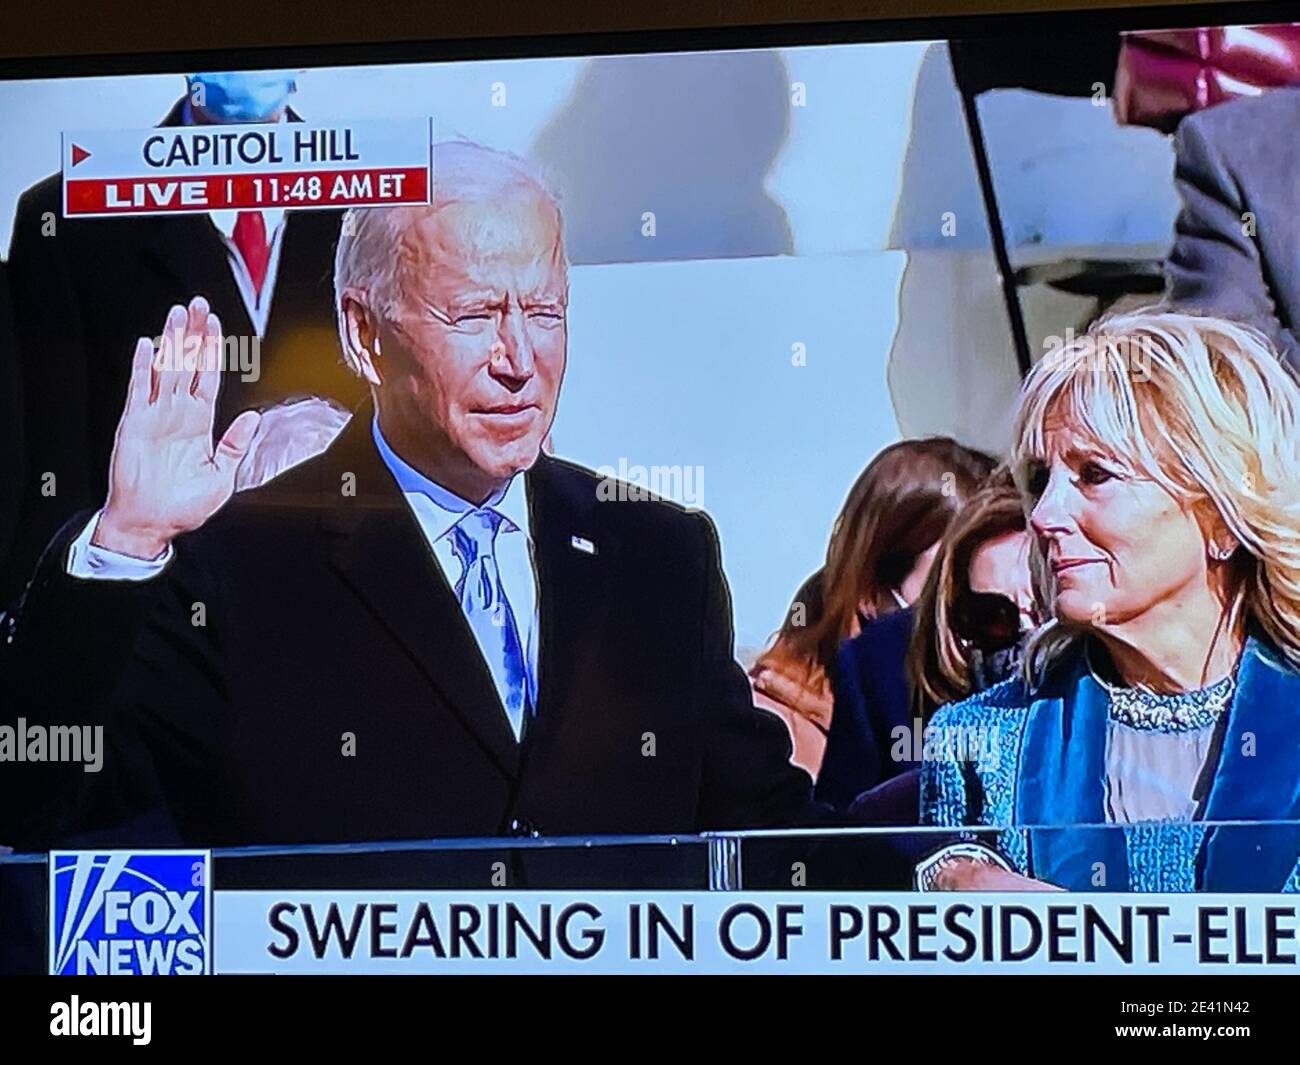 Washington, DC / USA - January 20, 2021: Fox News broadcasts live coverage of Joseph R. Biden, Jr, taking the Oath of Office as the 46th President. Stock Photo